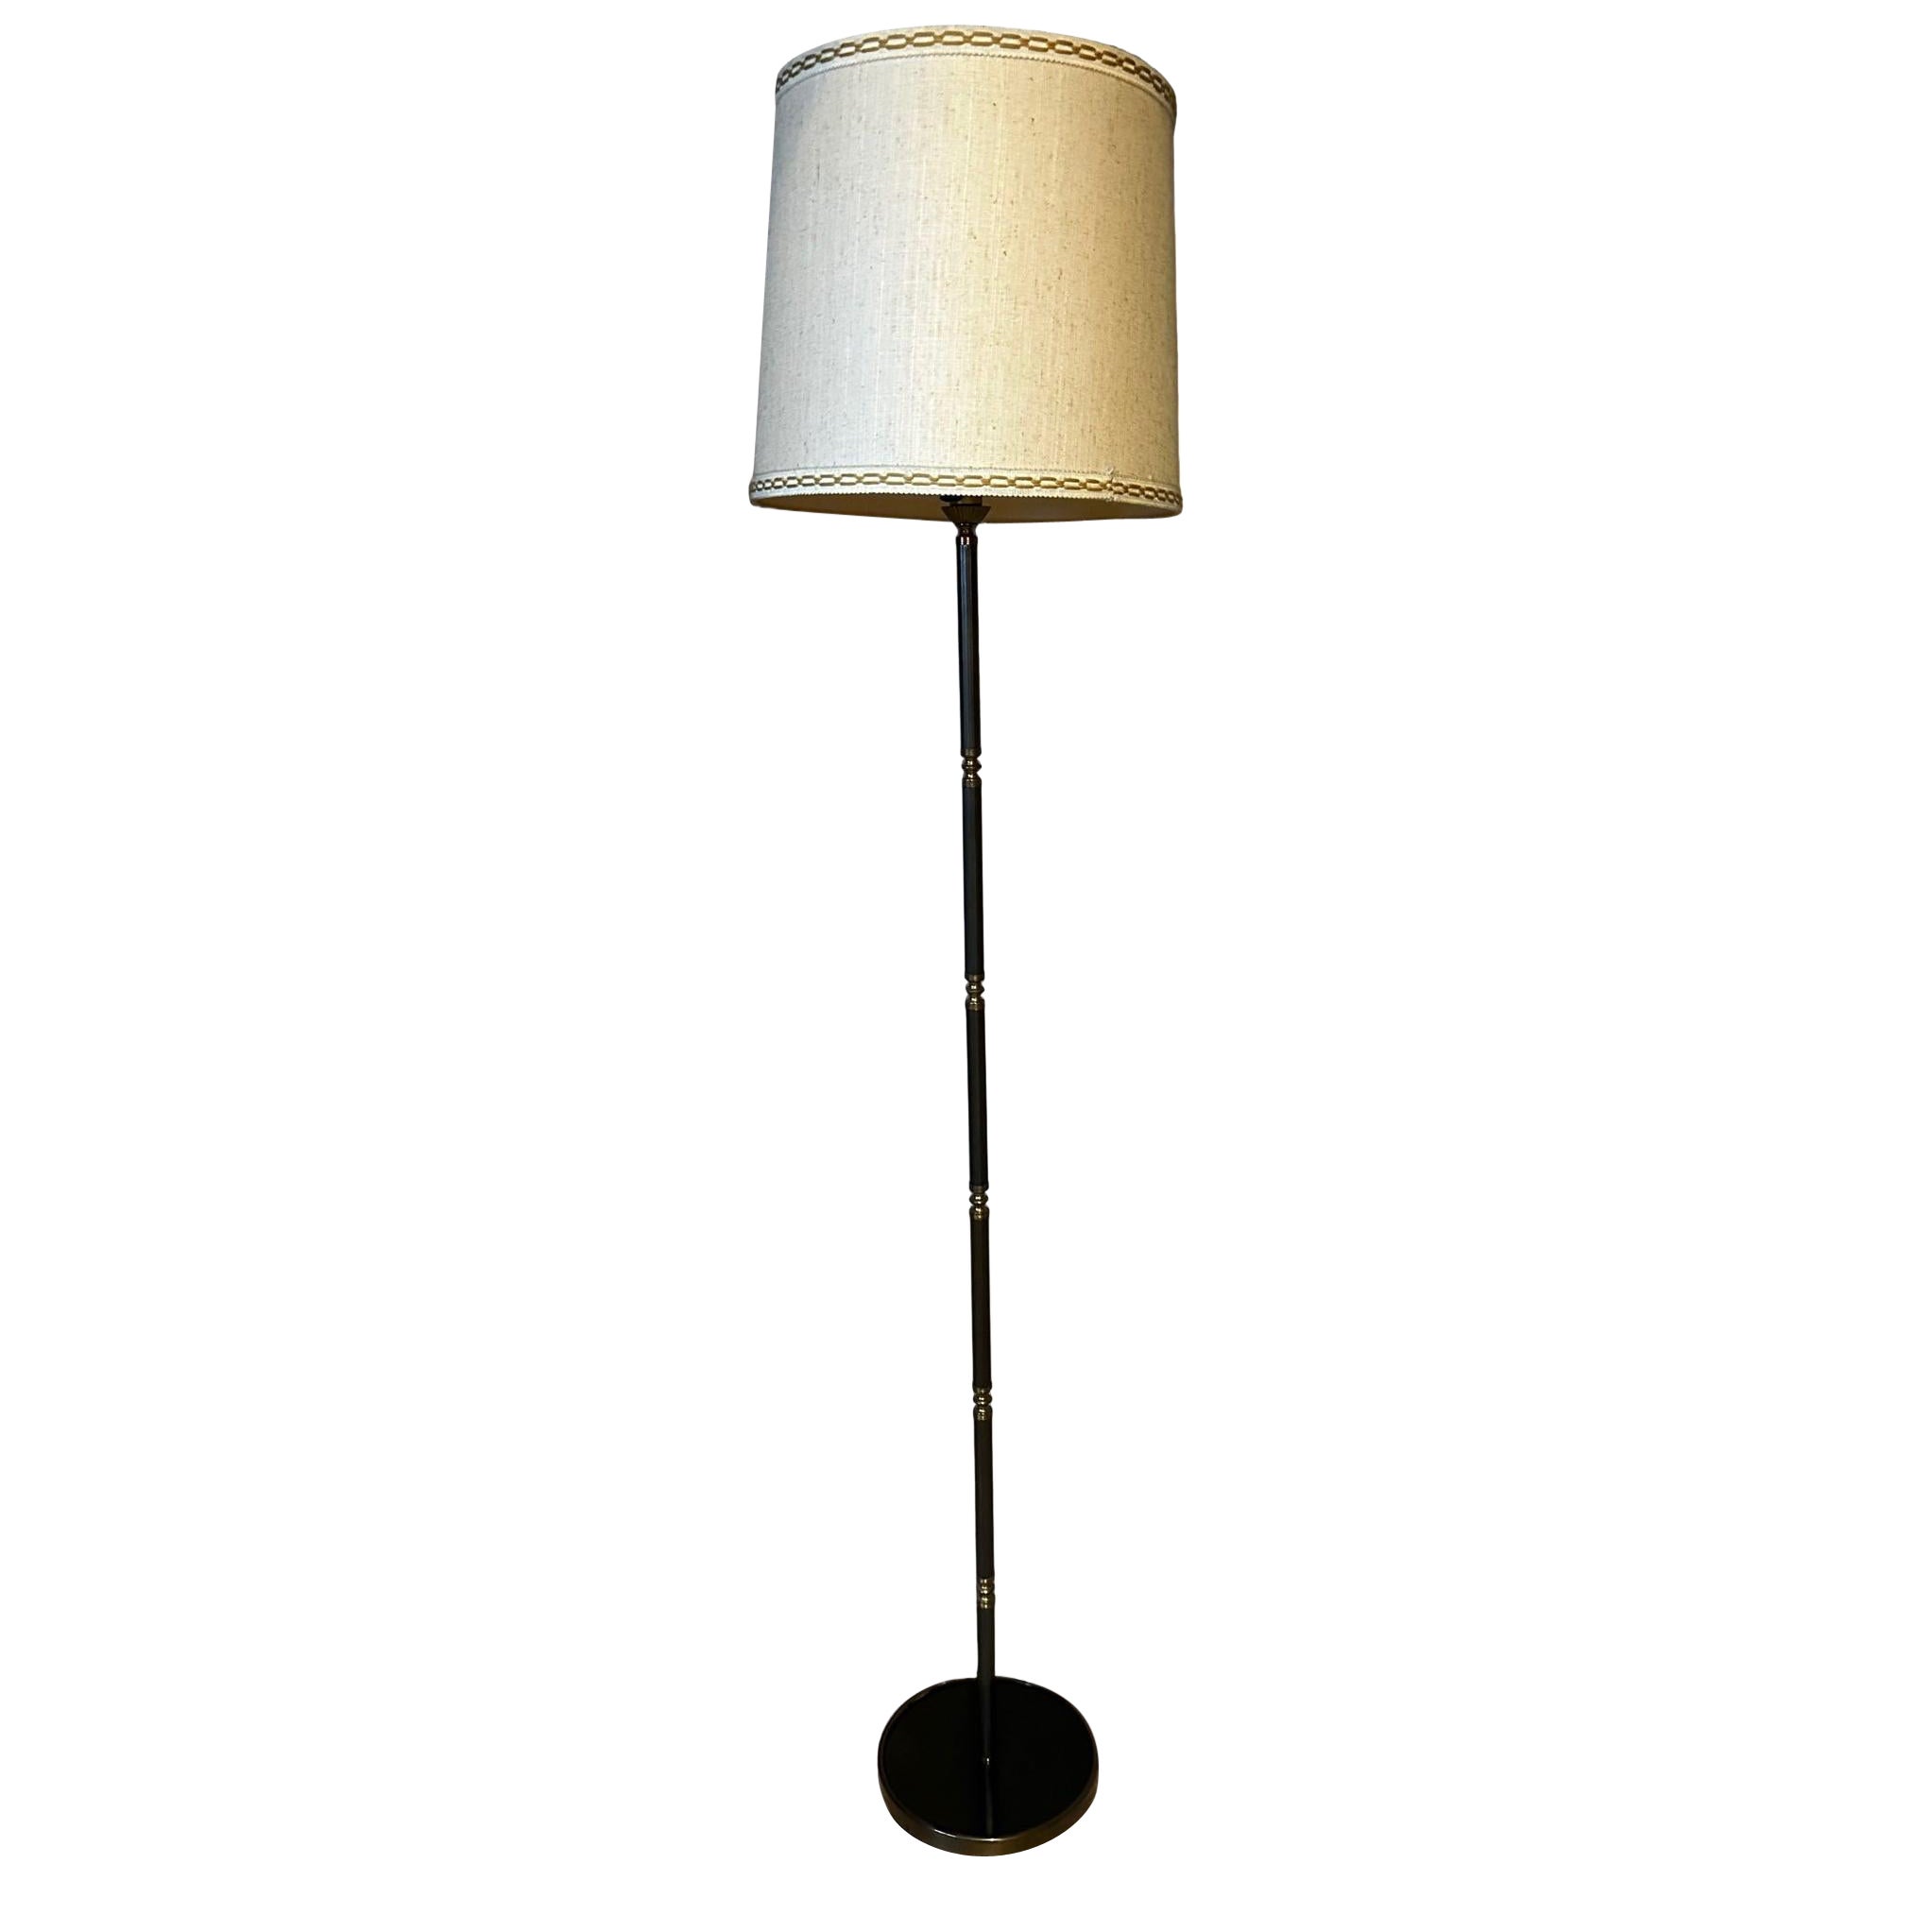 20th century French Vintage Brass and Metal Floor Lamp, 1960s For Sale